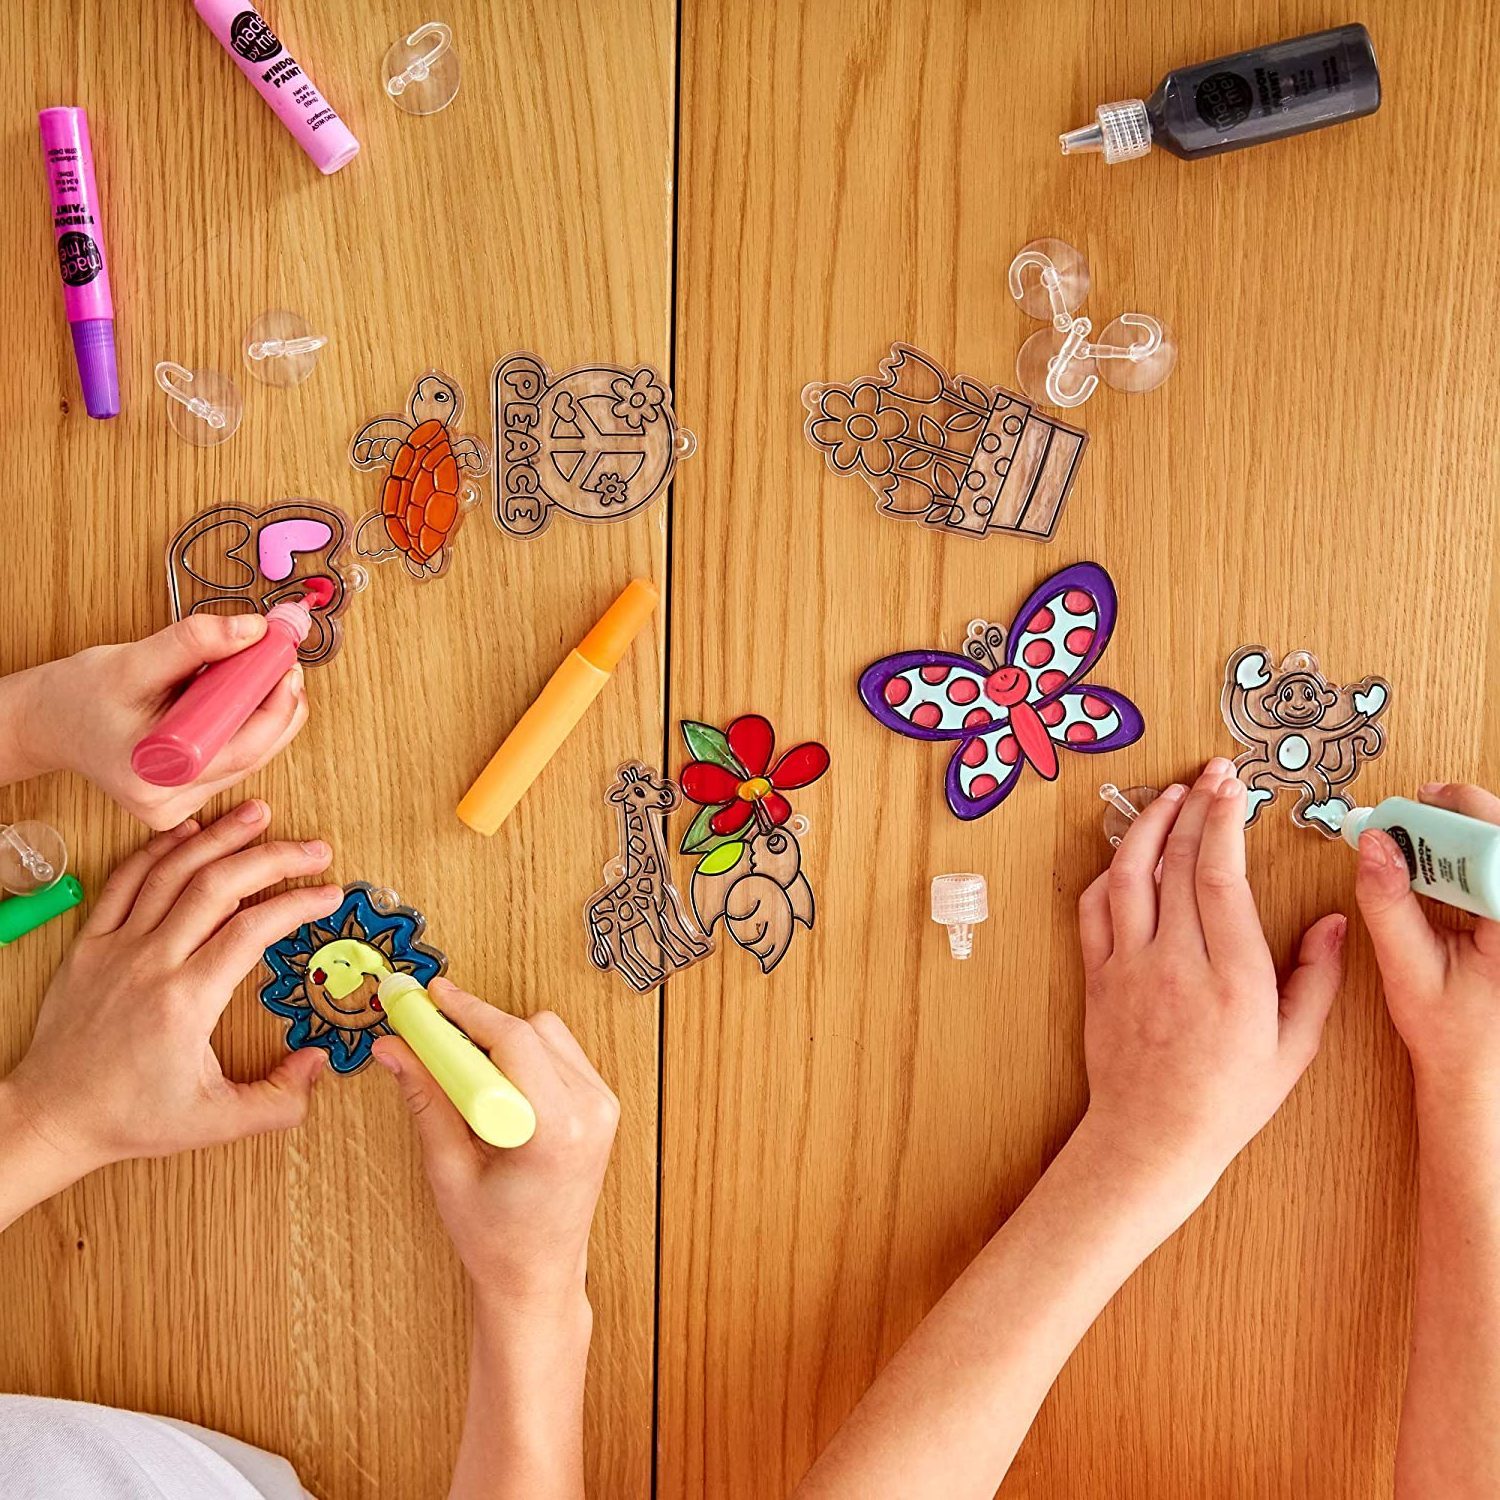 The 15 Best Craft Kits for Kids That Love to Create in 2022